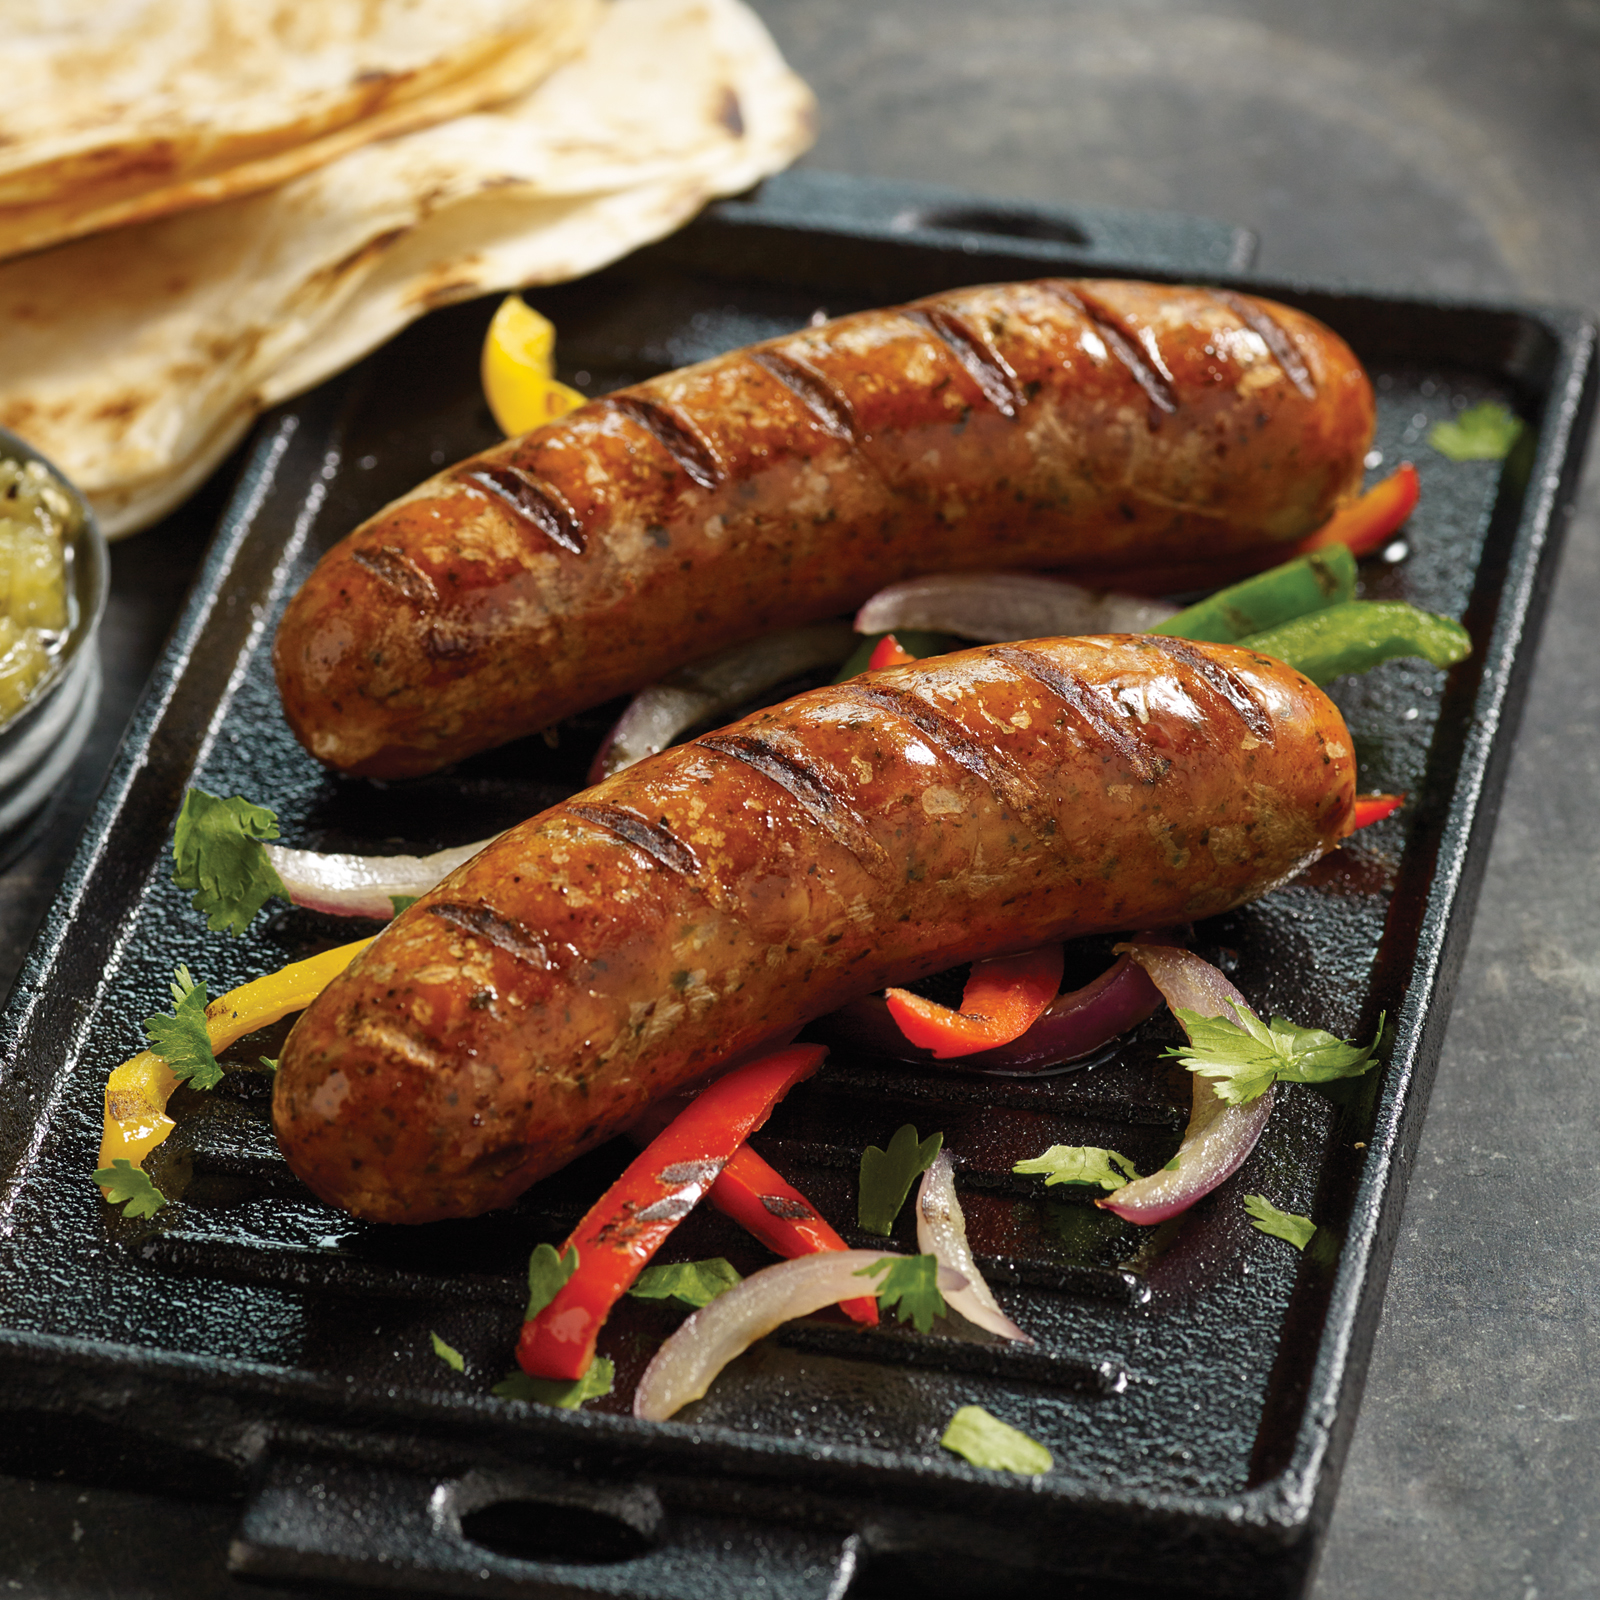 Spice up your next barbeque with Omaha Steaks super-juicy Chicken Chipotle Sausages!